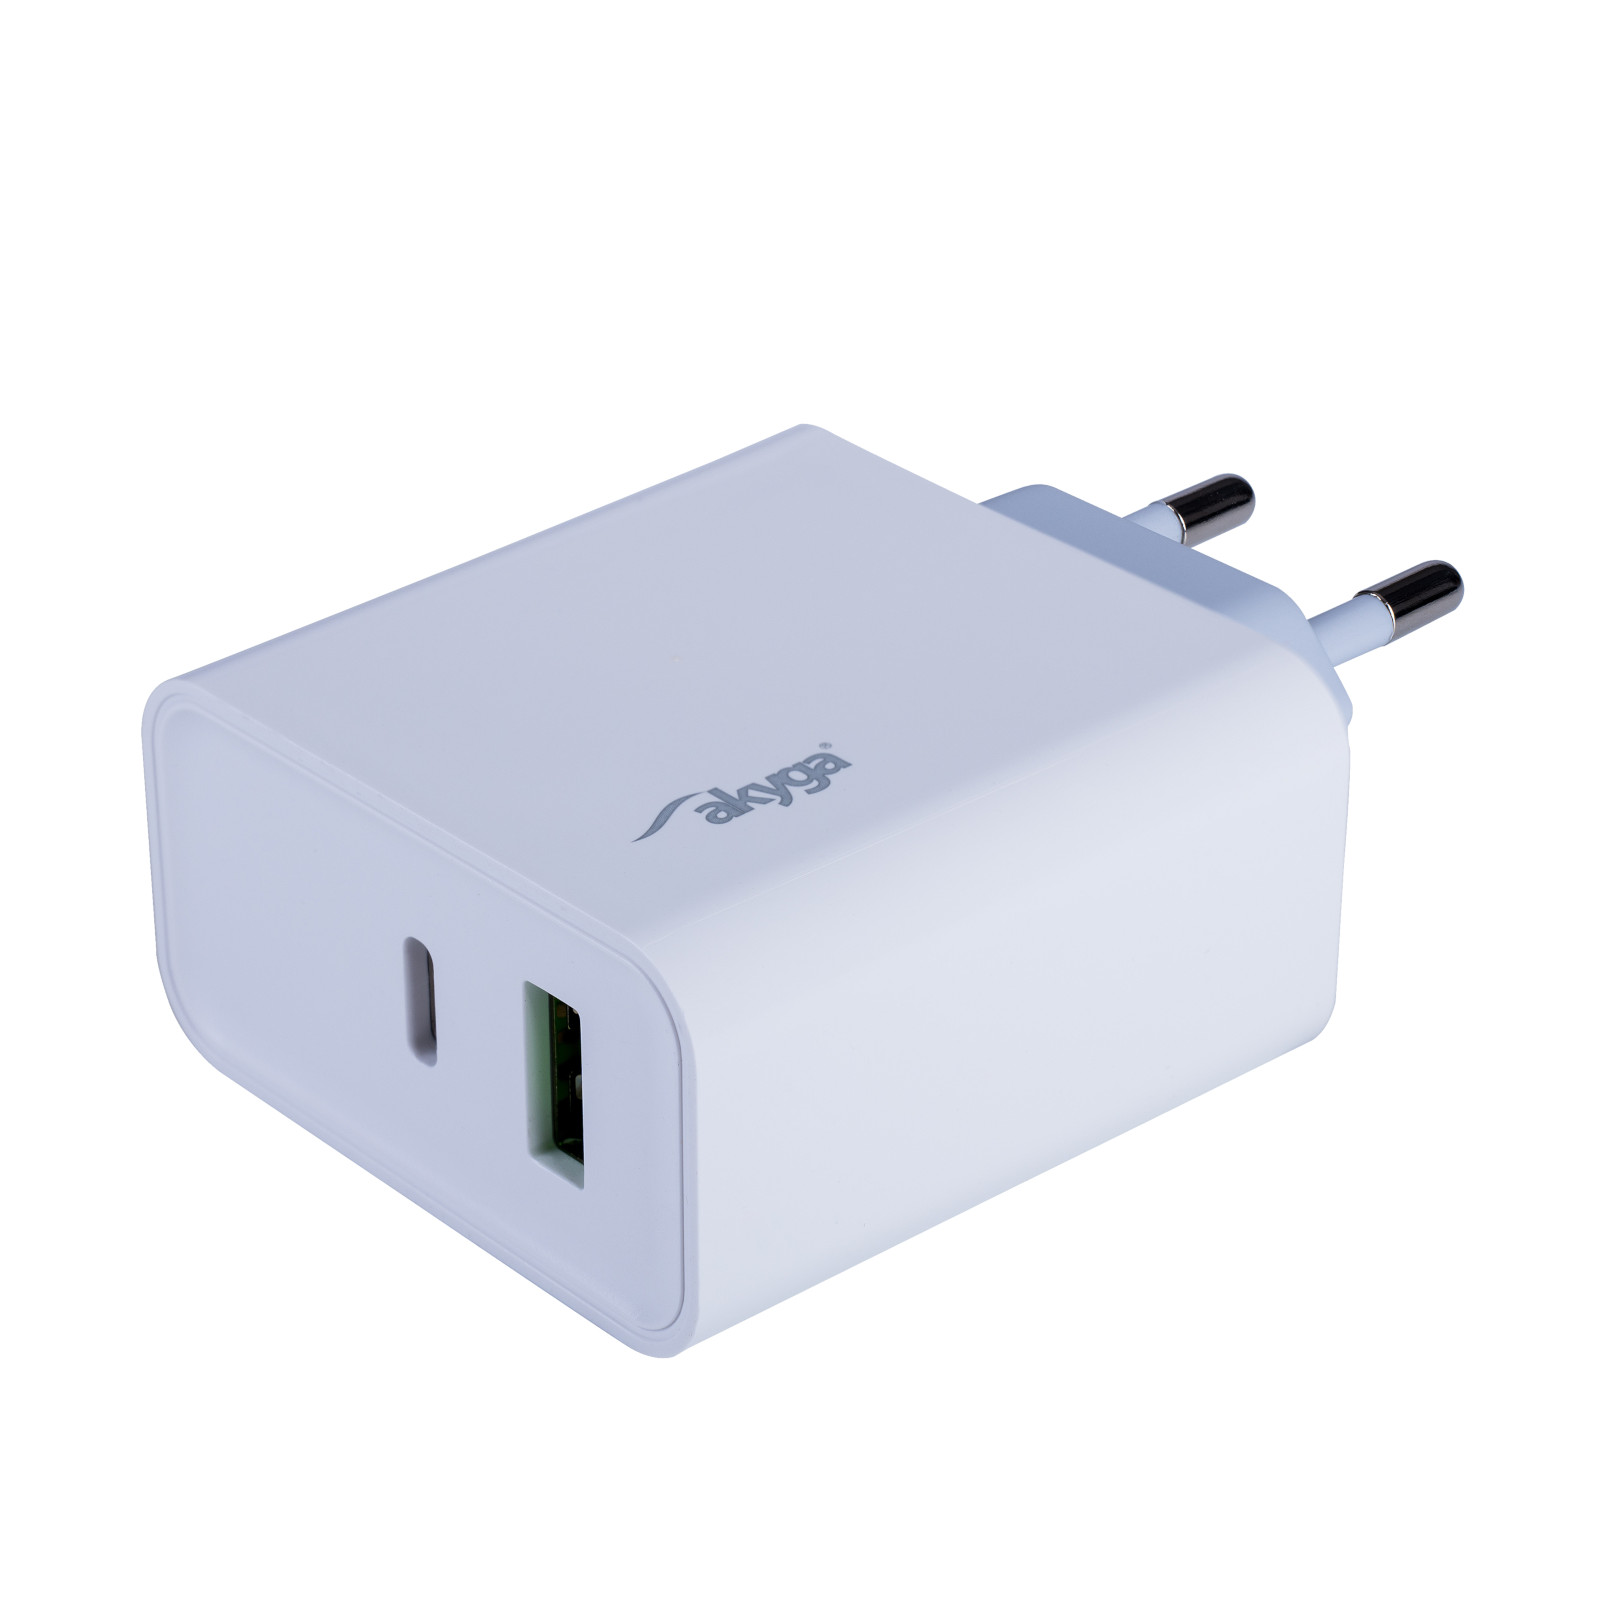 Tablet protein Painting USB Charger AK-CH-14 USB-A + USB-C PD 5-20 V / max. 3A 45W Quick Charge 3.0